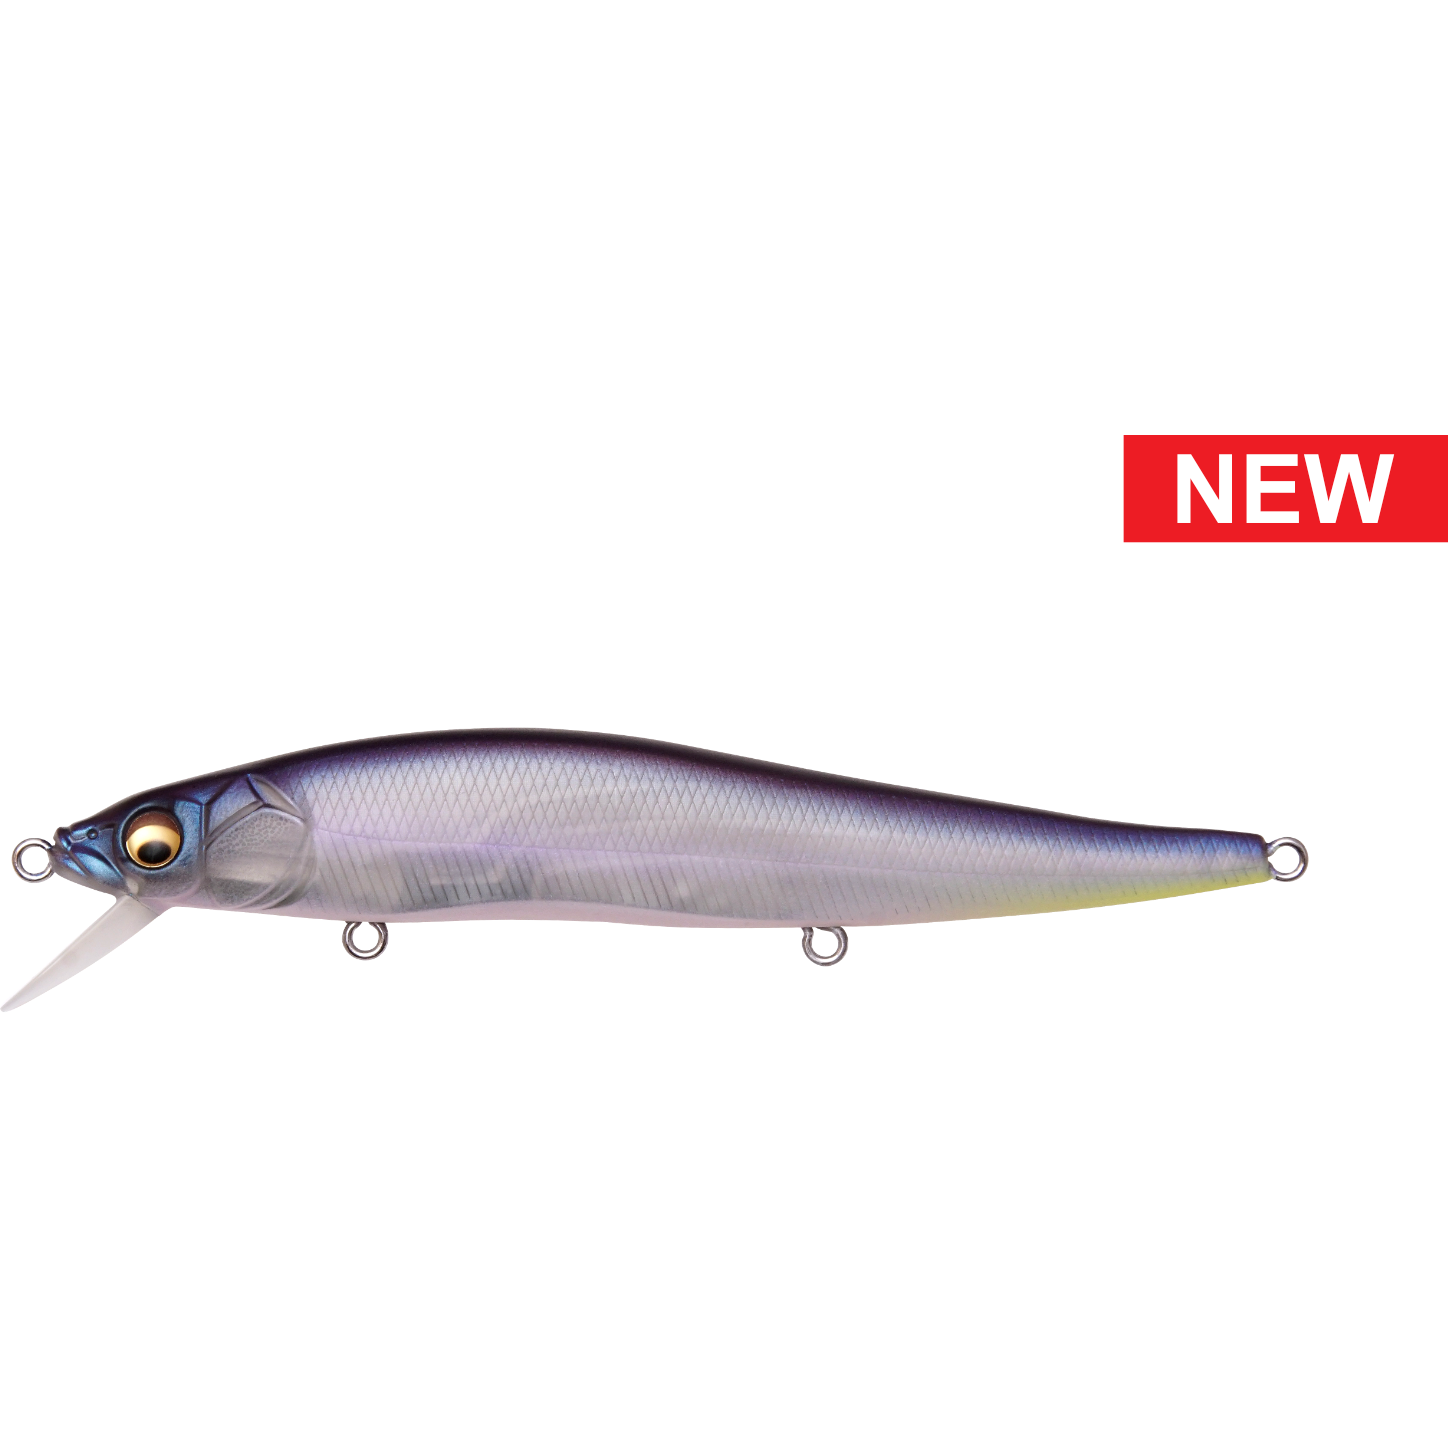 Shop Affordable Hard Life Bait and Tackle